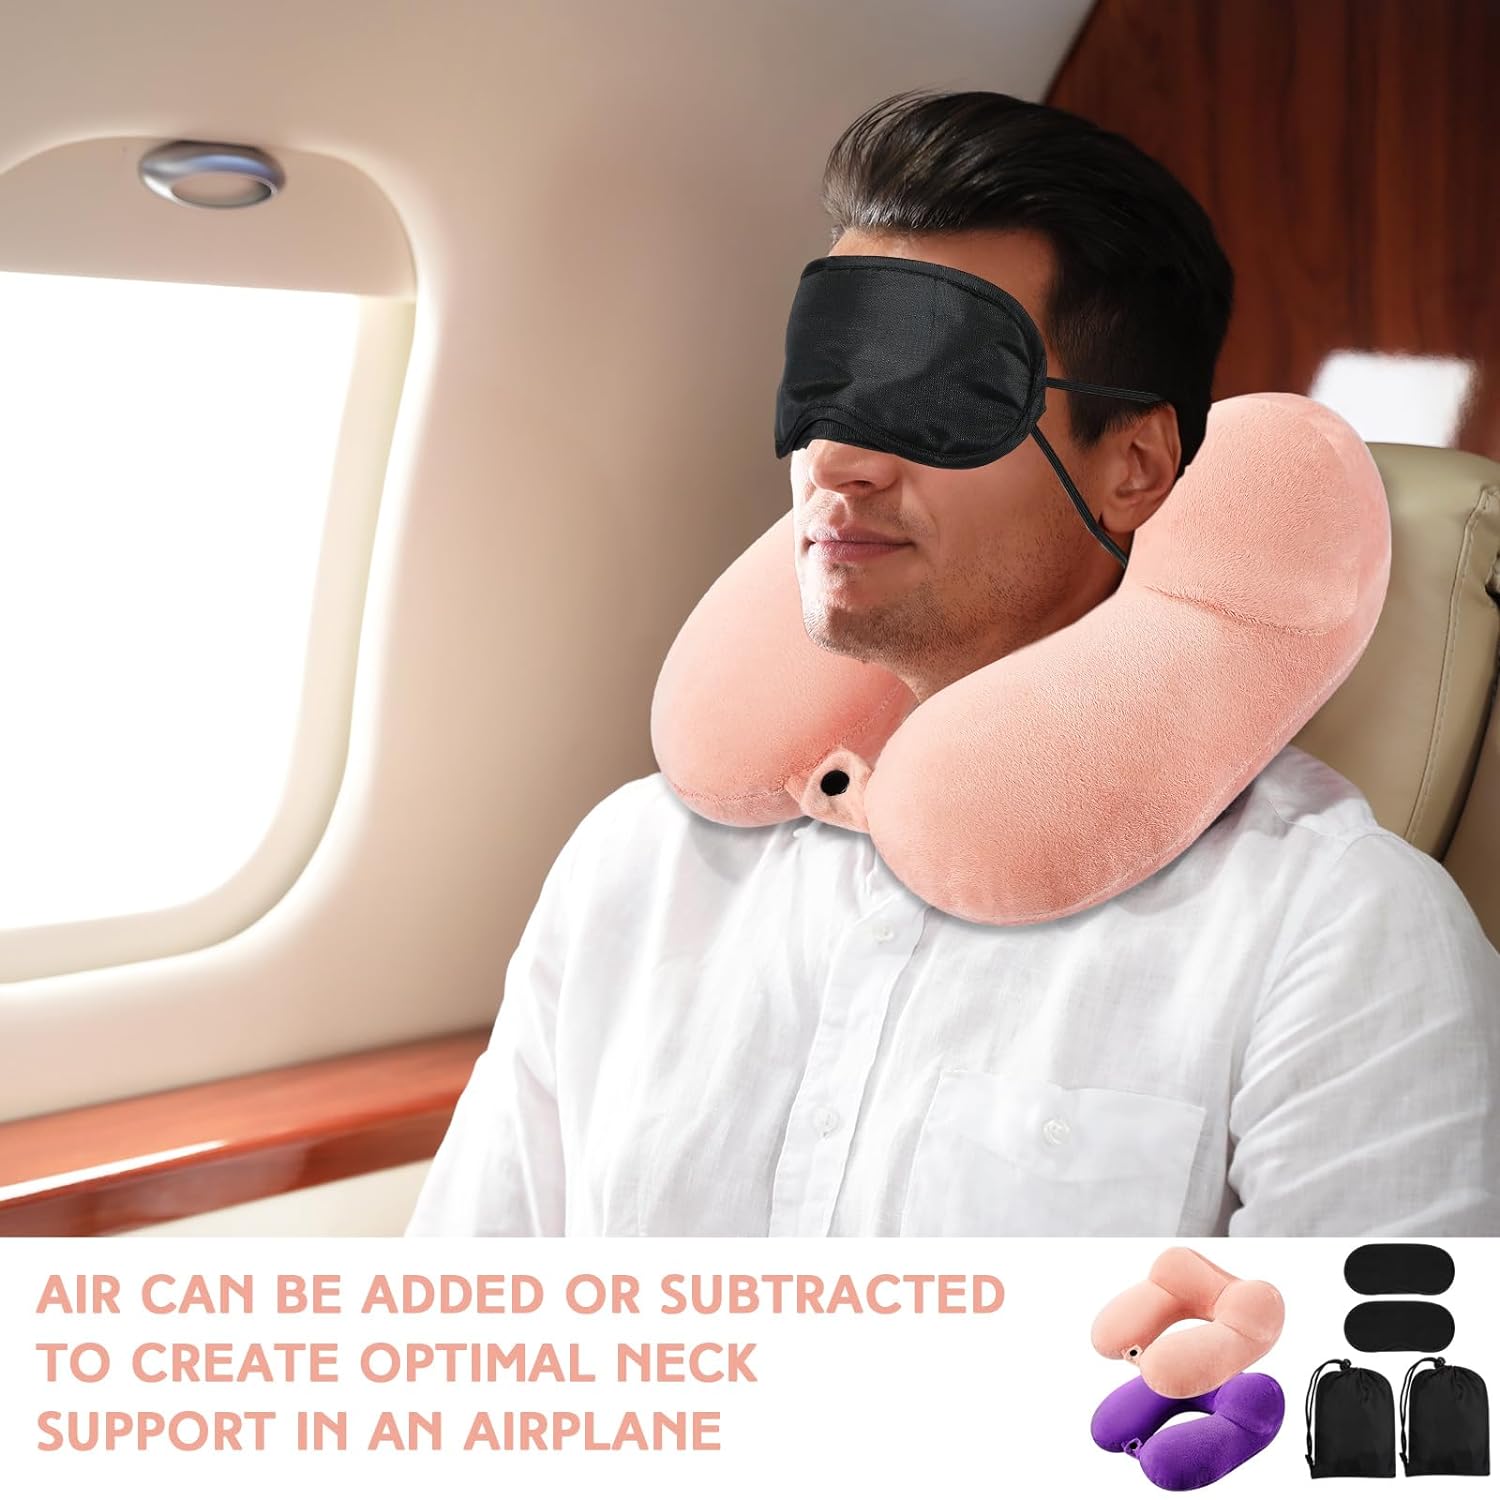 Sintuff 2 Pack Inflatable Travel Pillow for Airplanes Soft Velvet Inflatable Travel Neck Pillows with Compact Bag and Blindfold for Traveling, Airplane, Train, Car, Office (Light Pink and Violet)